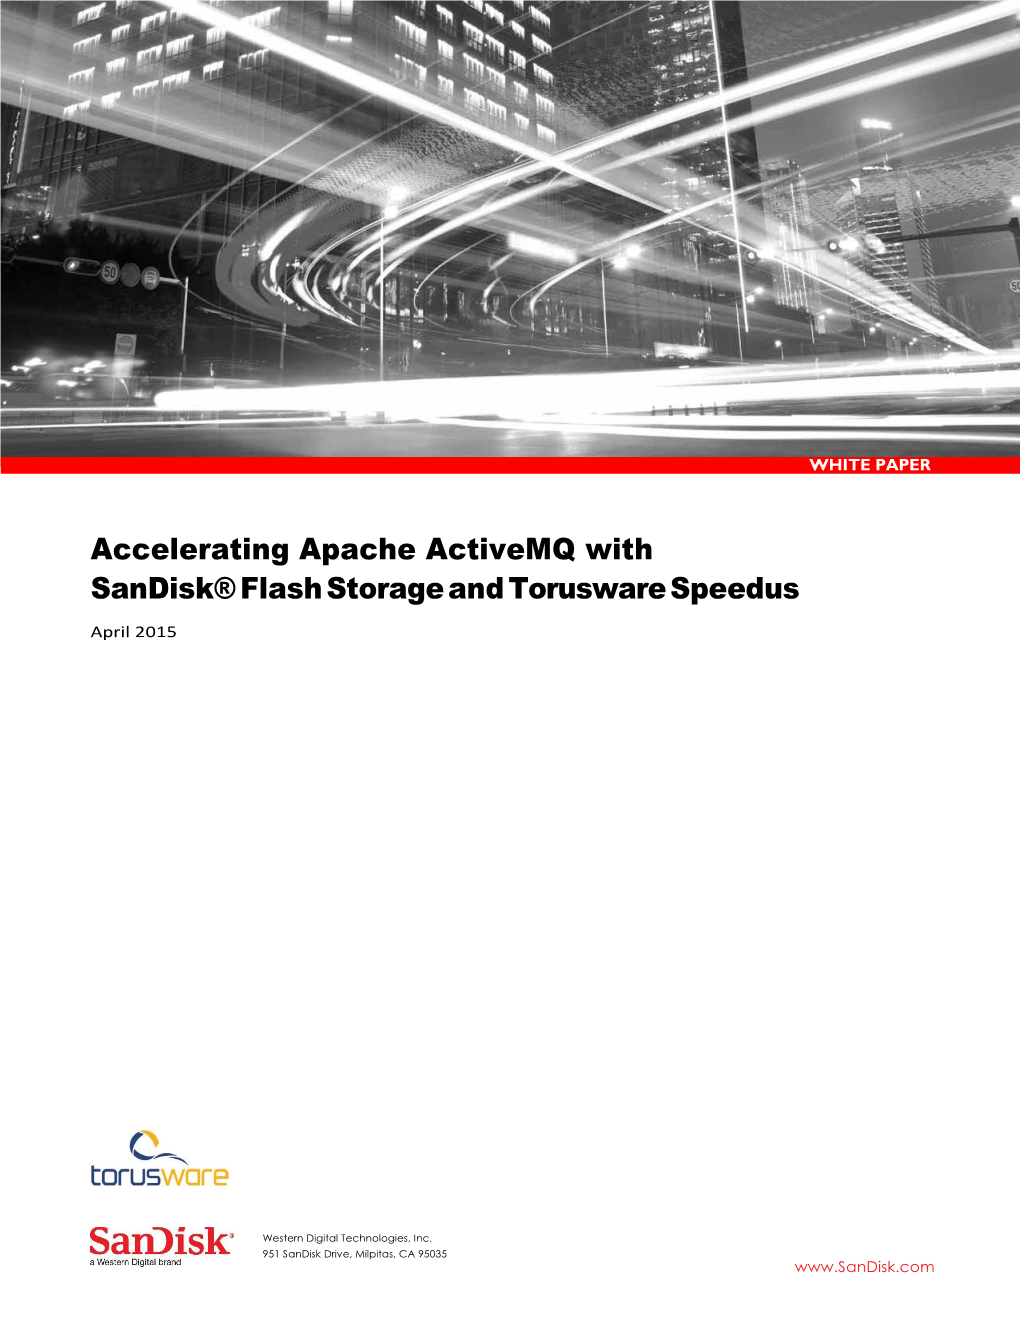 Accelerating Apache Activemq with Sandisk&lt;Sup&gt;®&lt;/Sup&gt; Flash